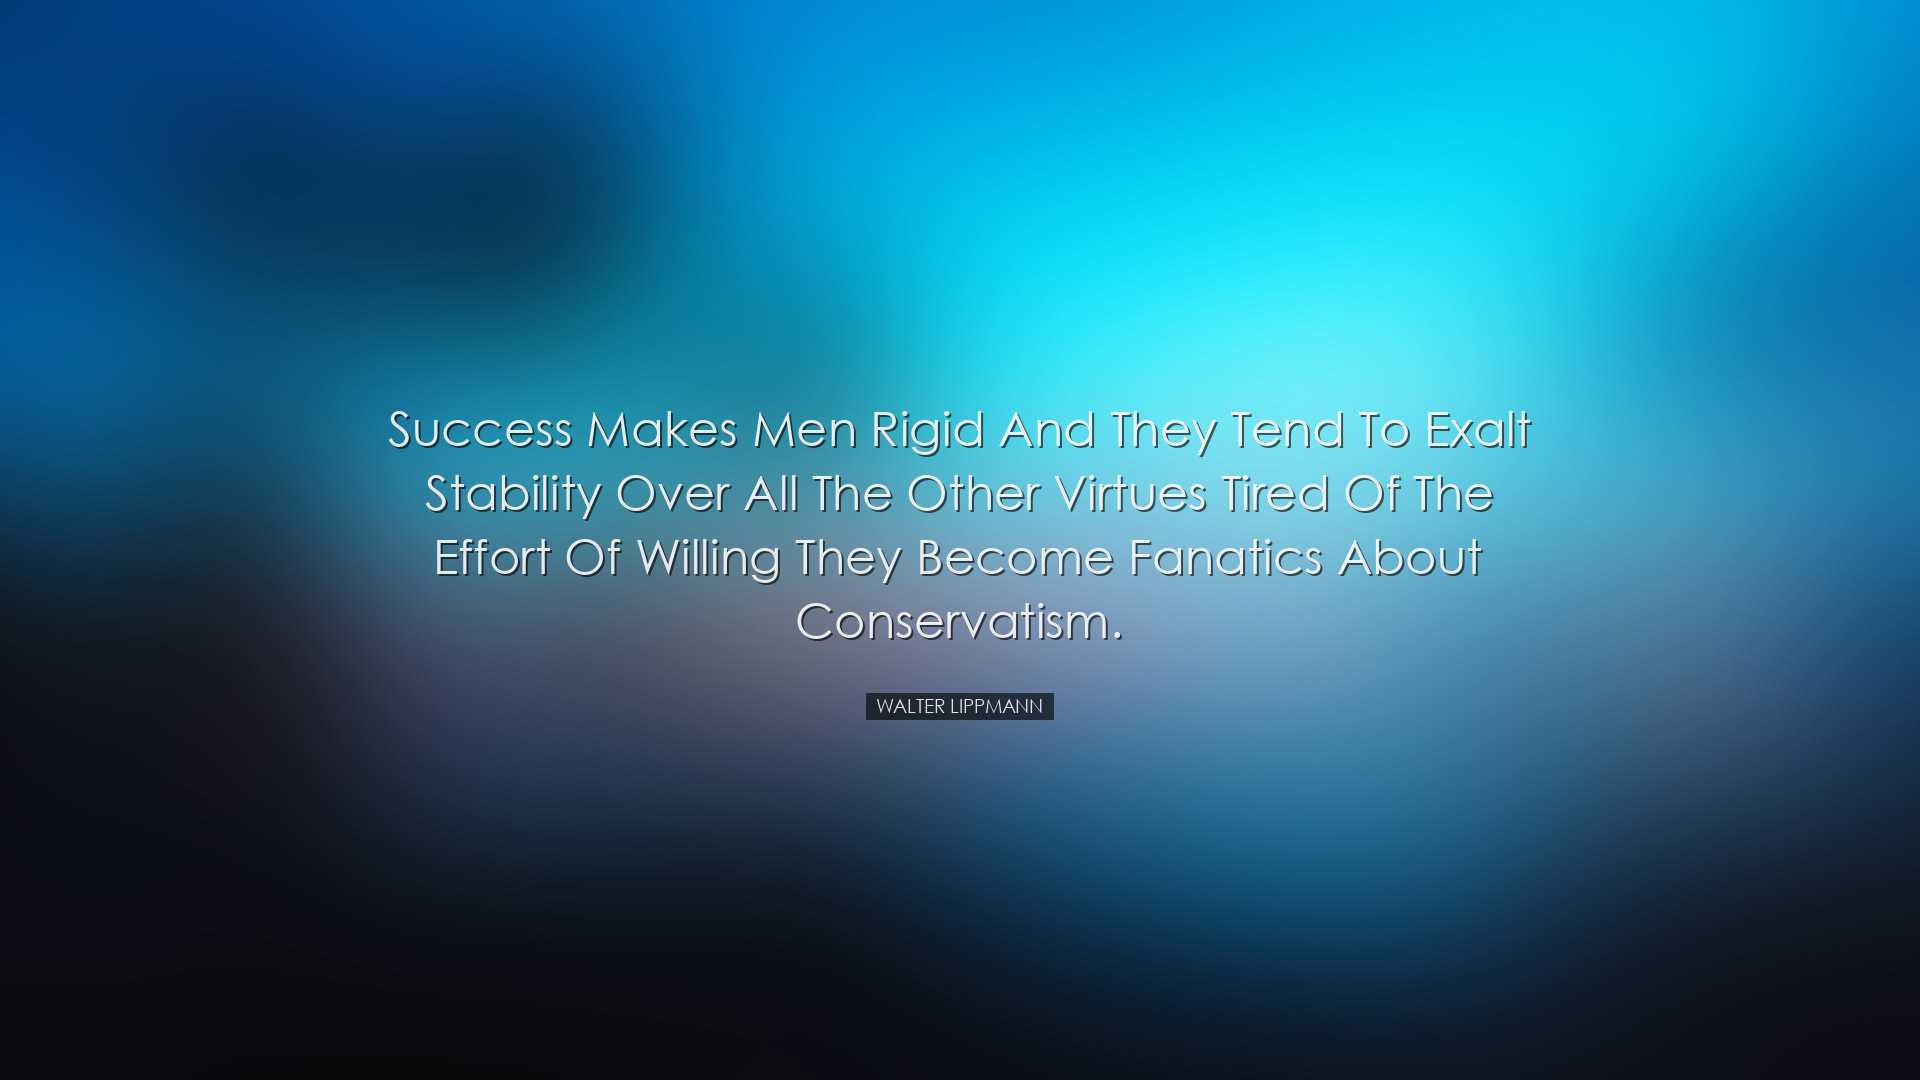 Success makes men rigid and they tend to exalt stability over all